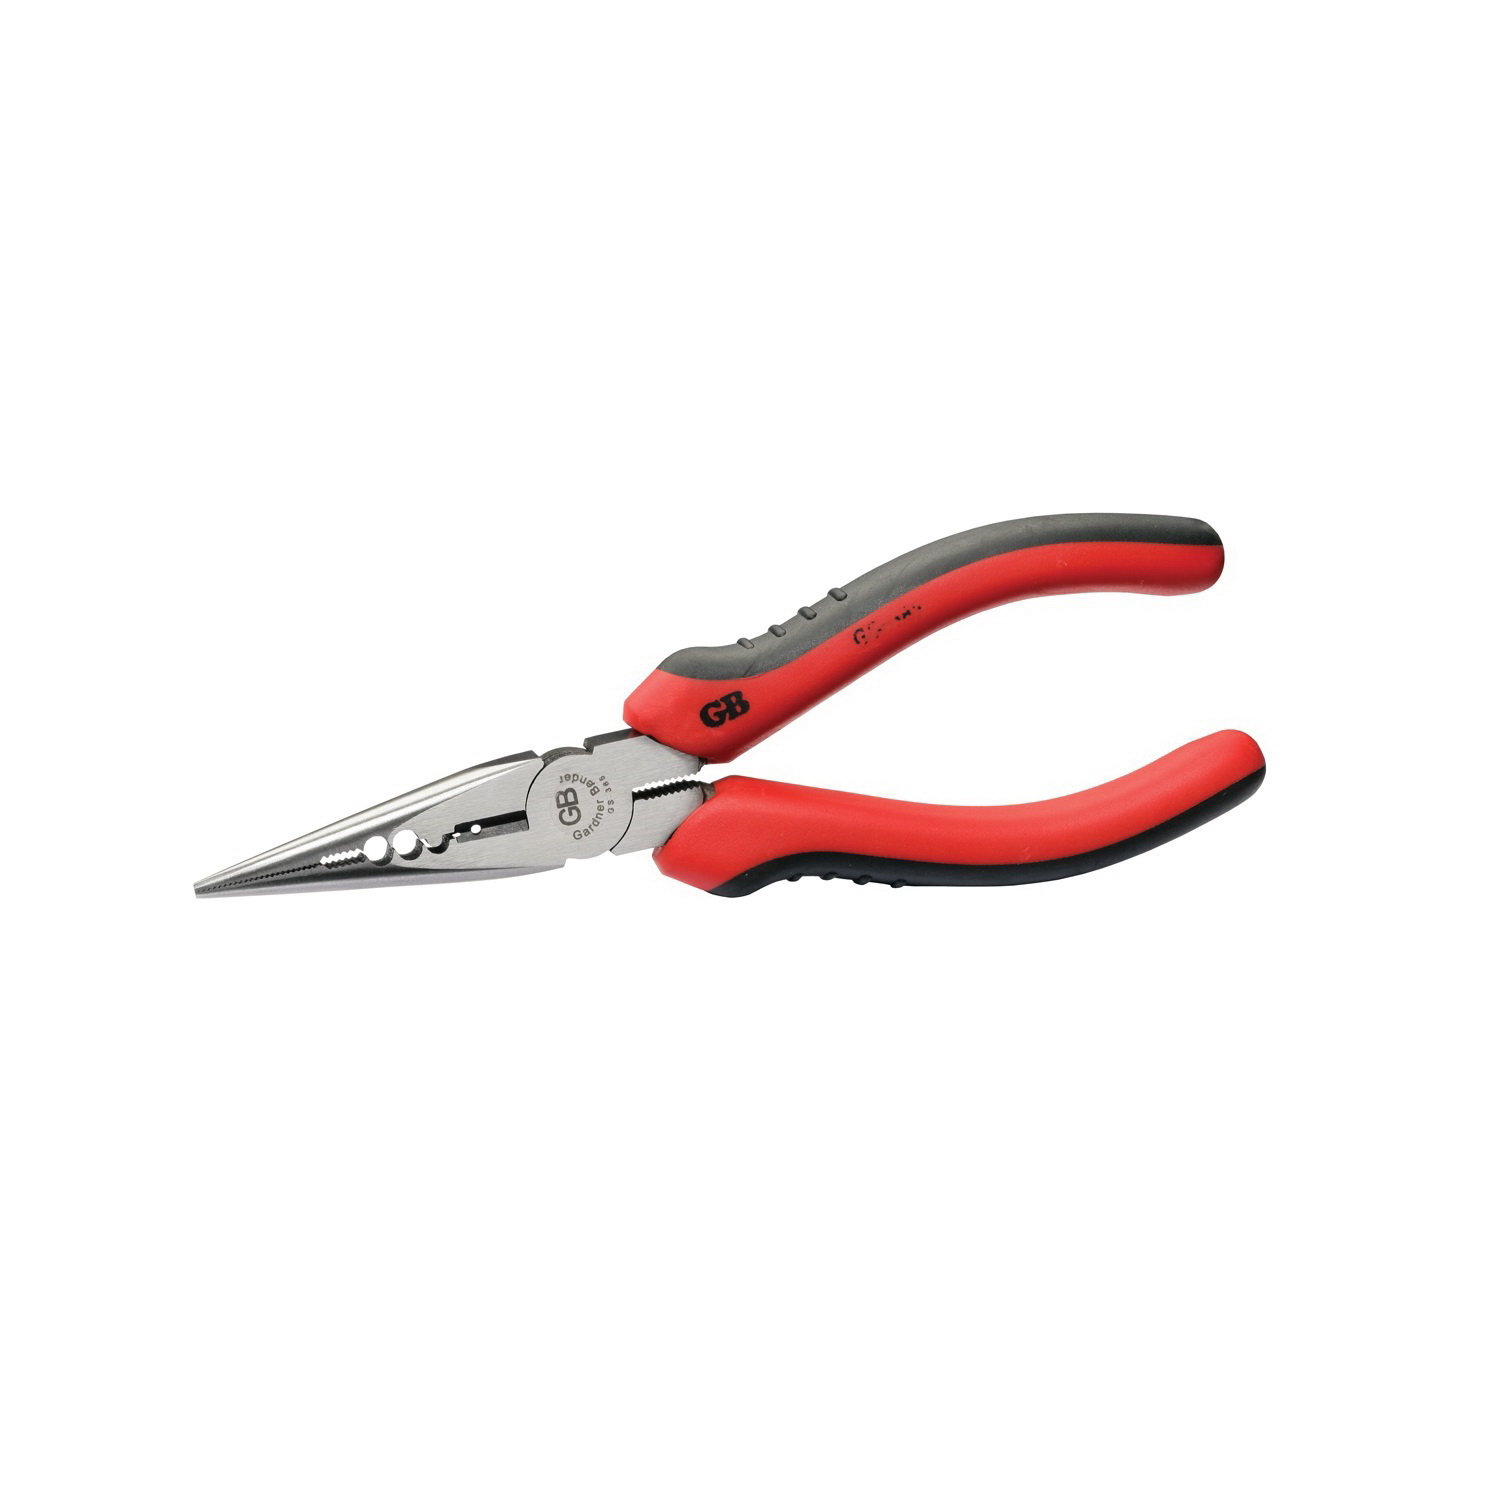 GS-385 Plier, 6-3/4 in OAL, 1-1/2 in Cutting Capacity, Red Handle, Cushioned Handle, 1/4 in W Tip